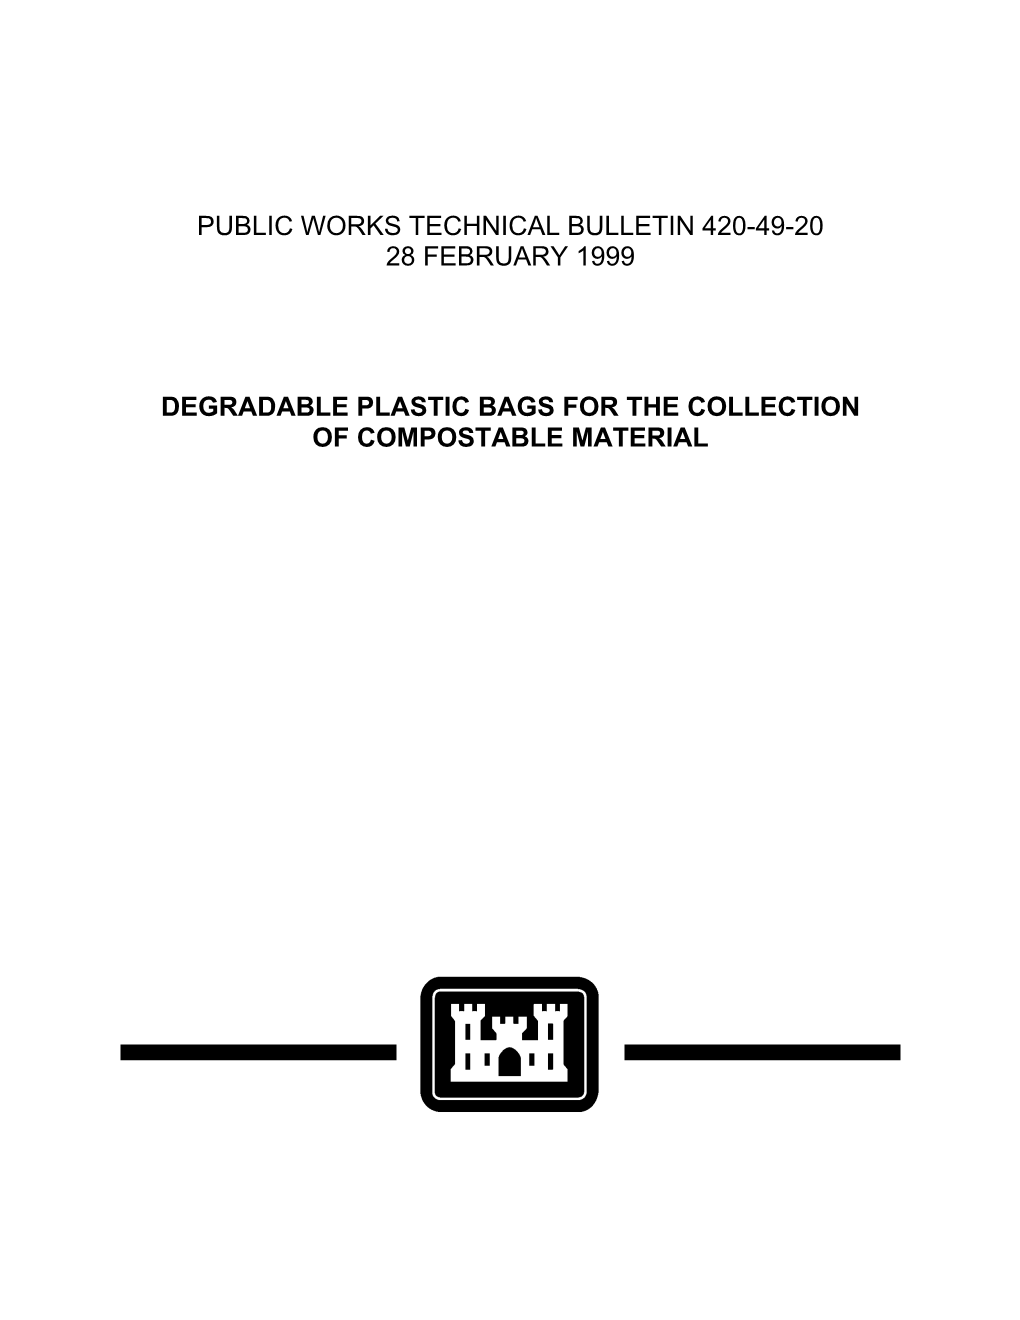 PWTB 420-49-20 Degradable Plastic Bags for the Collection Of